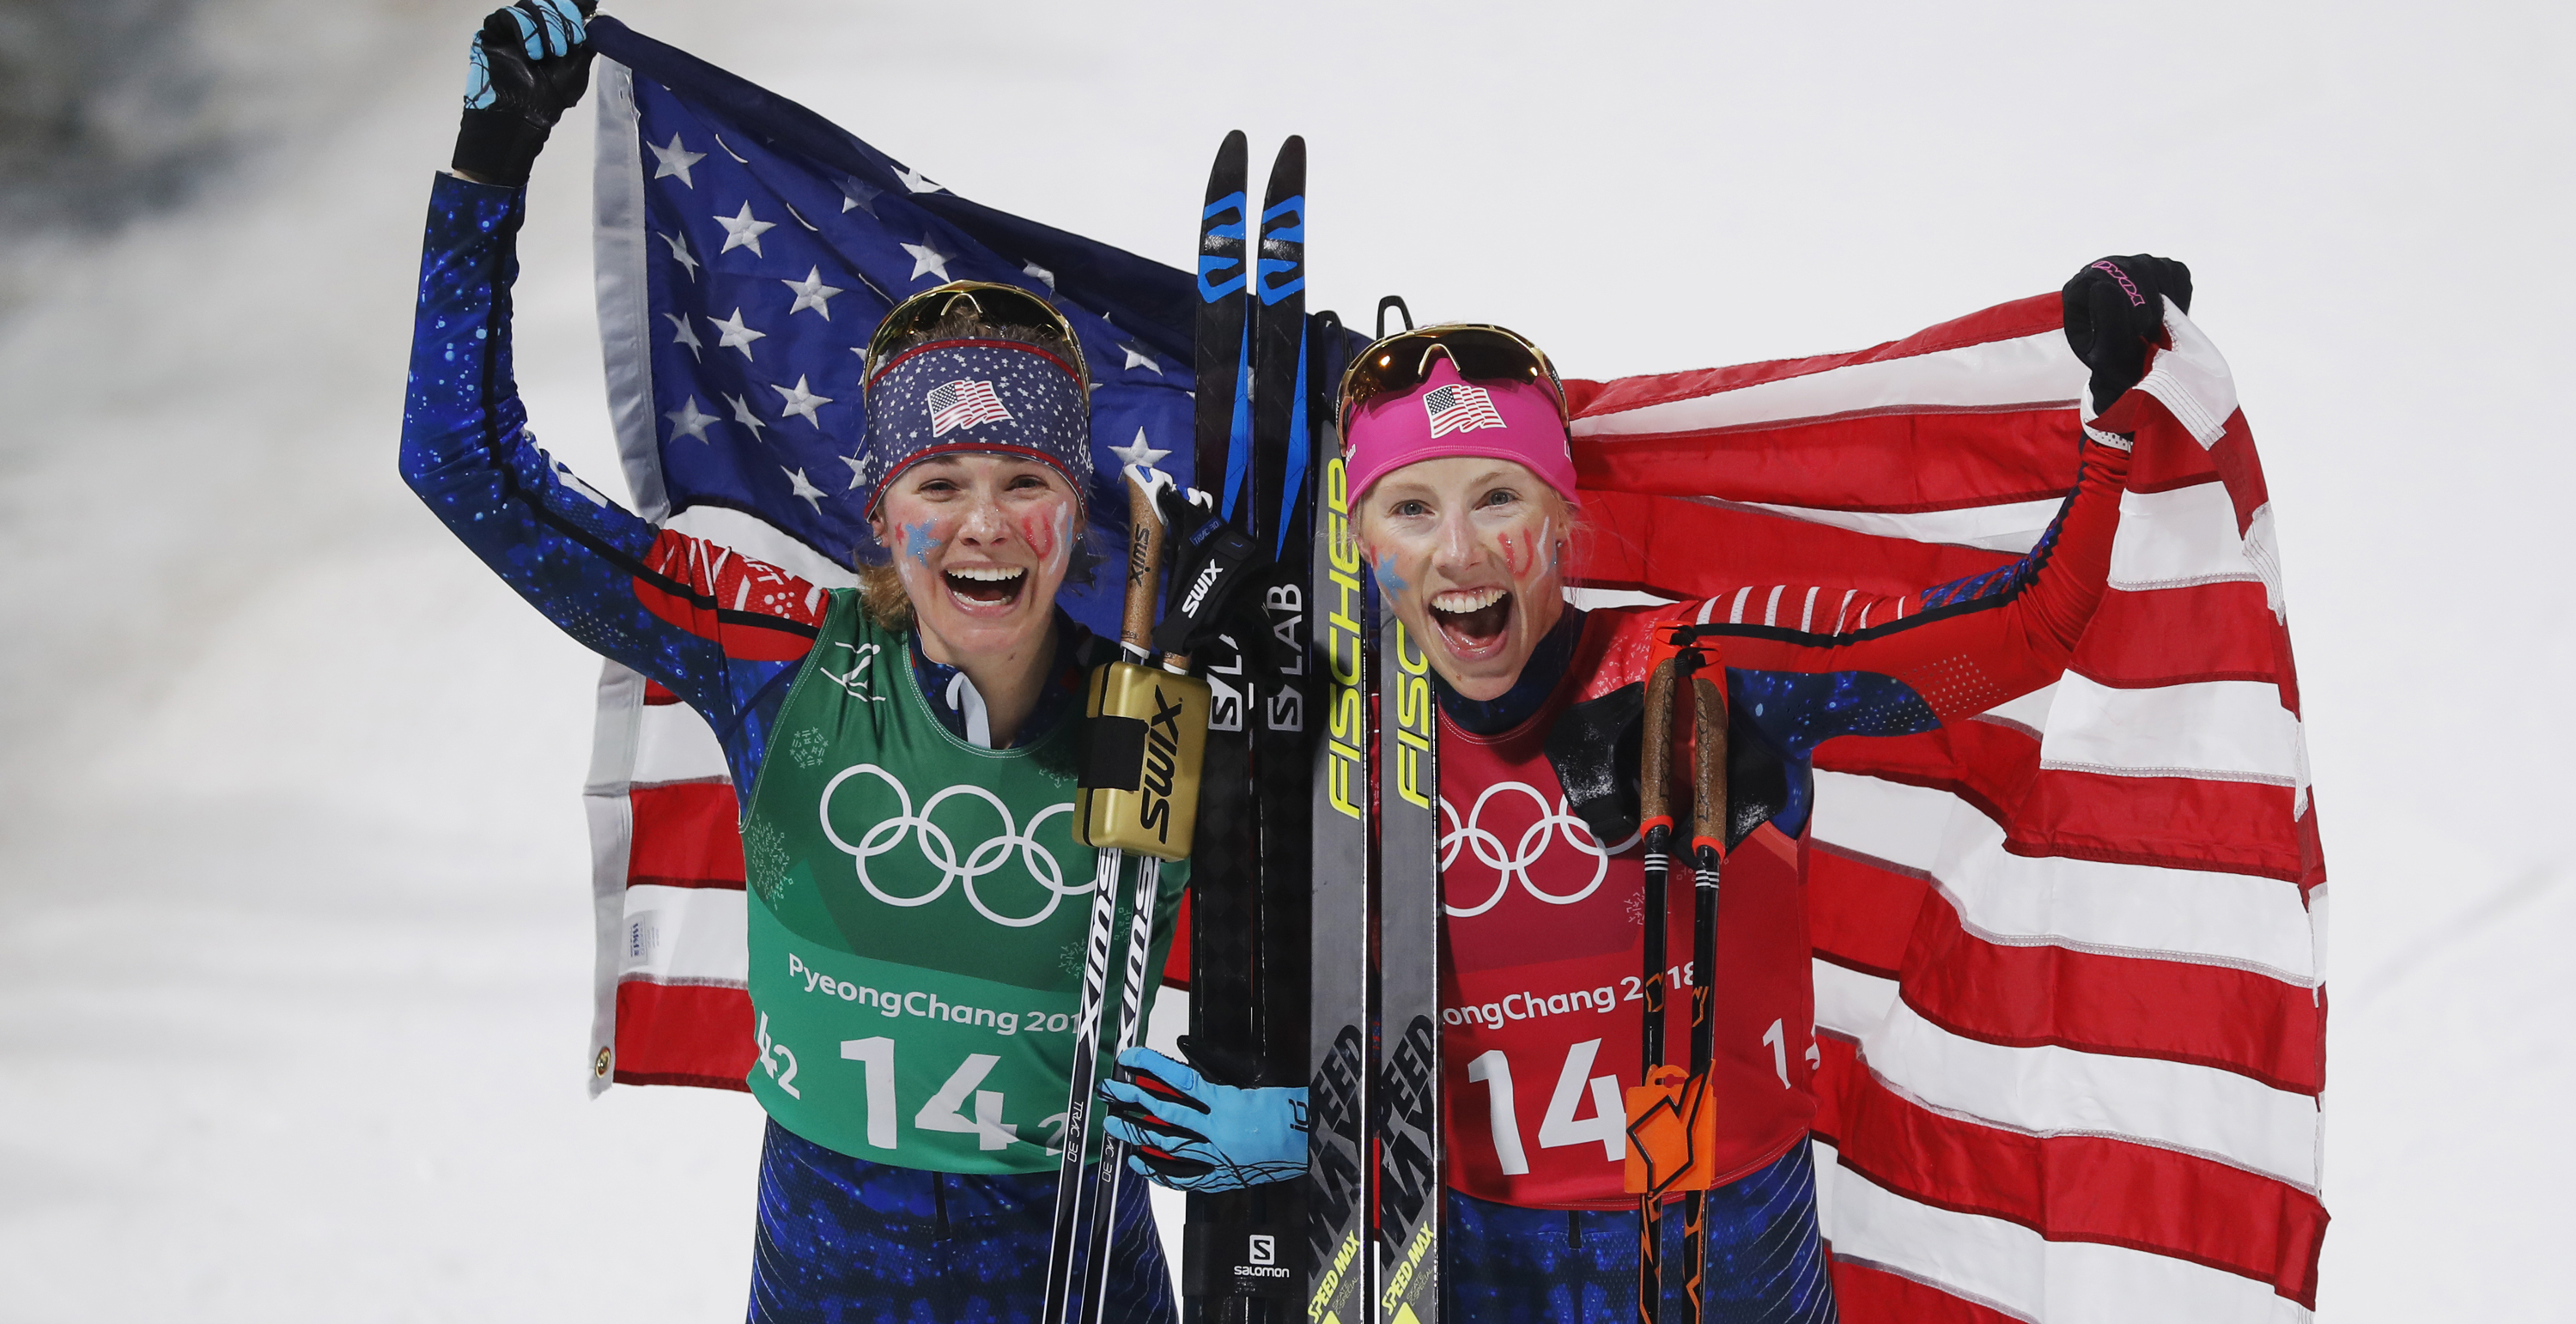 Kikkan Randall and Diggins Jessica celebrate winning gold during the women's Cross Country team sprint at Alpensia Cross-Country Centre Wednesday. (Getty Images - Nils Petter Nilsson)